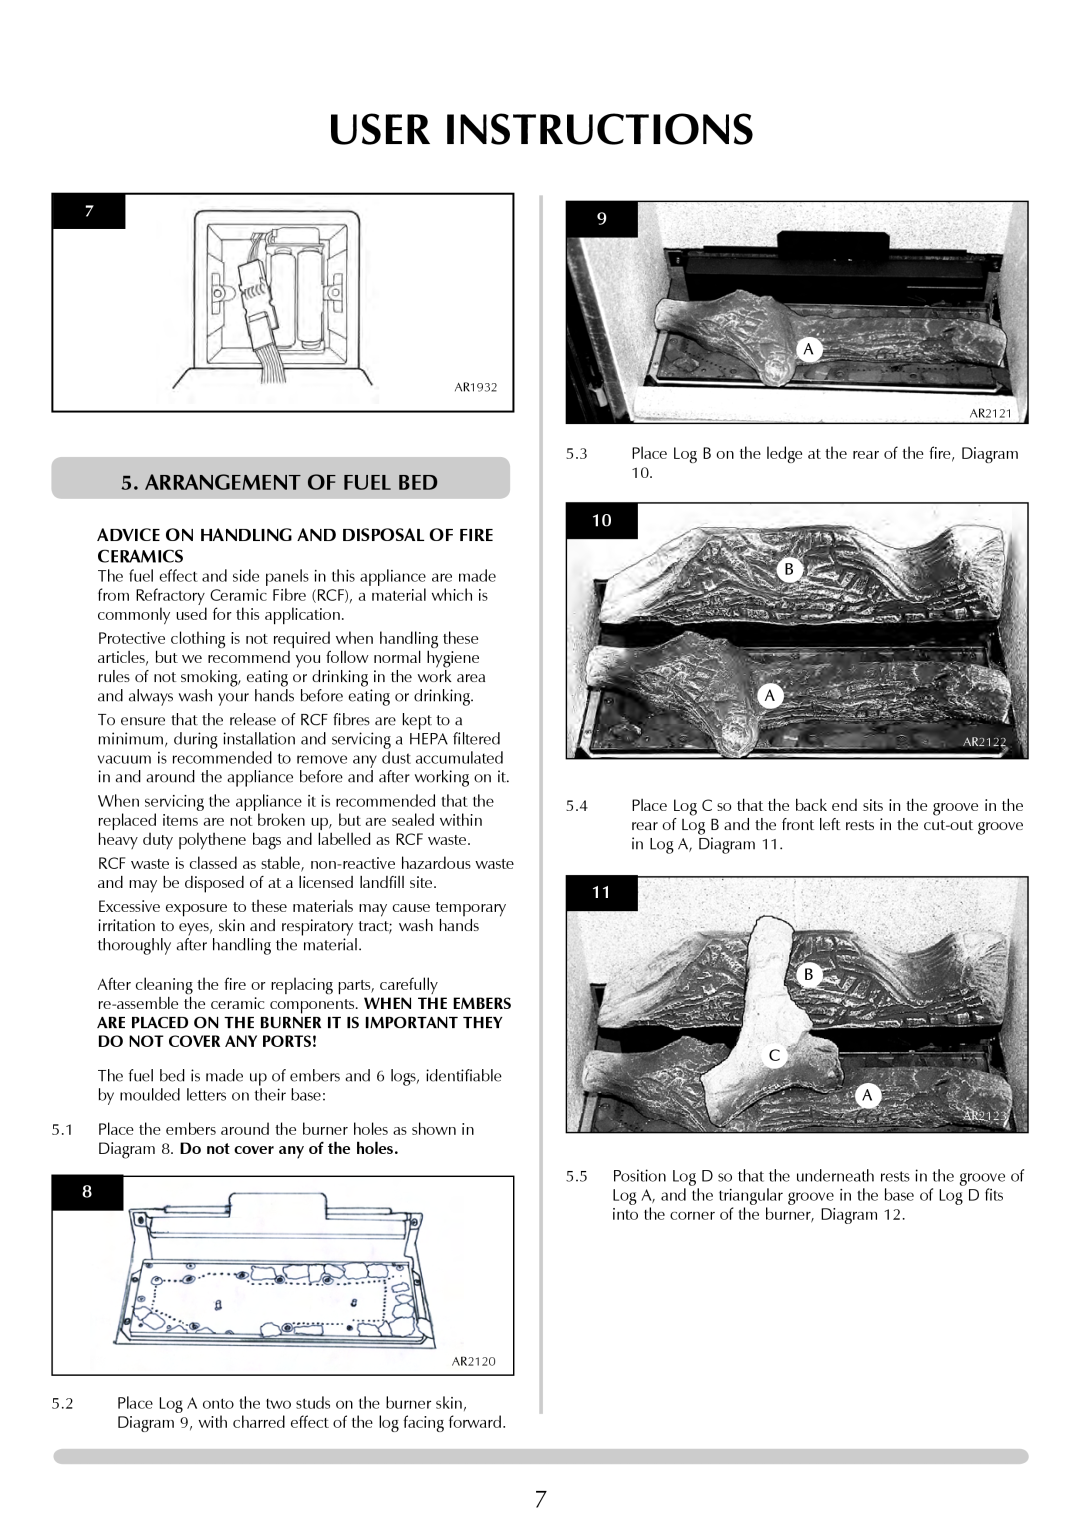 Stovax Studio 22 manual Arrangement Of Fuel Bed, User Instructions, Advice On Handling And Disposal Of Fire Ceramics 